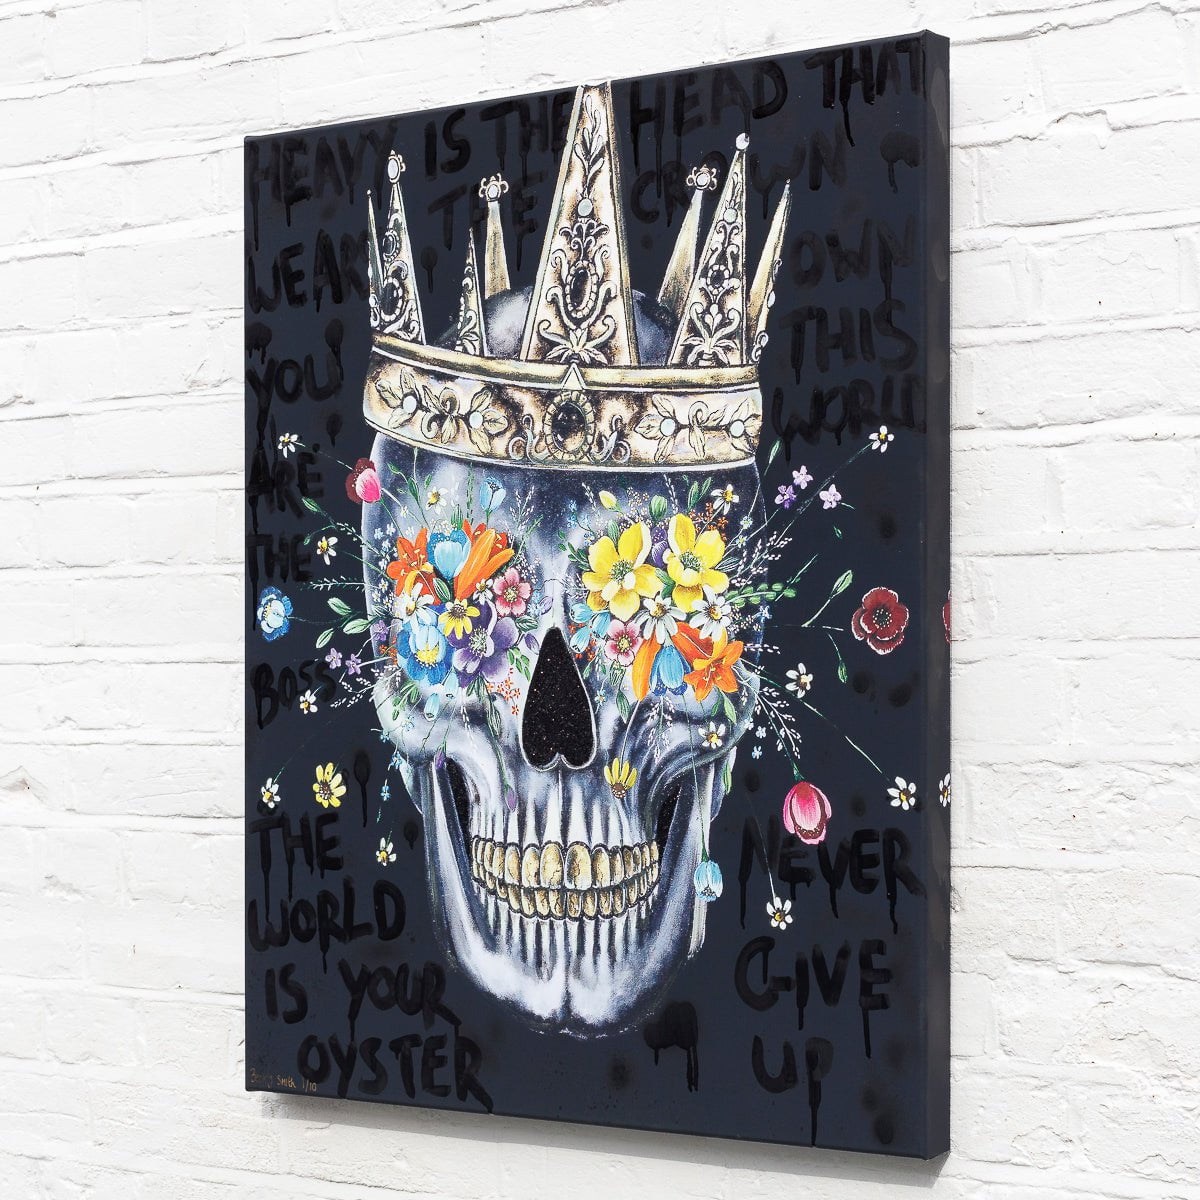 Heavy Is The Head That Wears The Crown - Deluxe Edition Becky Smith